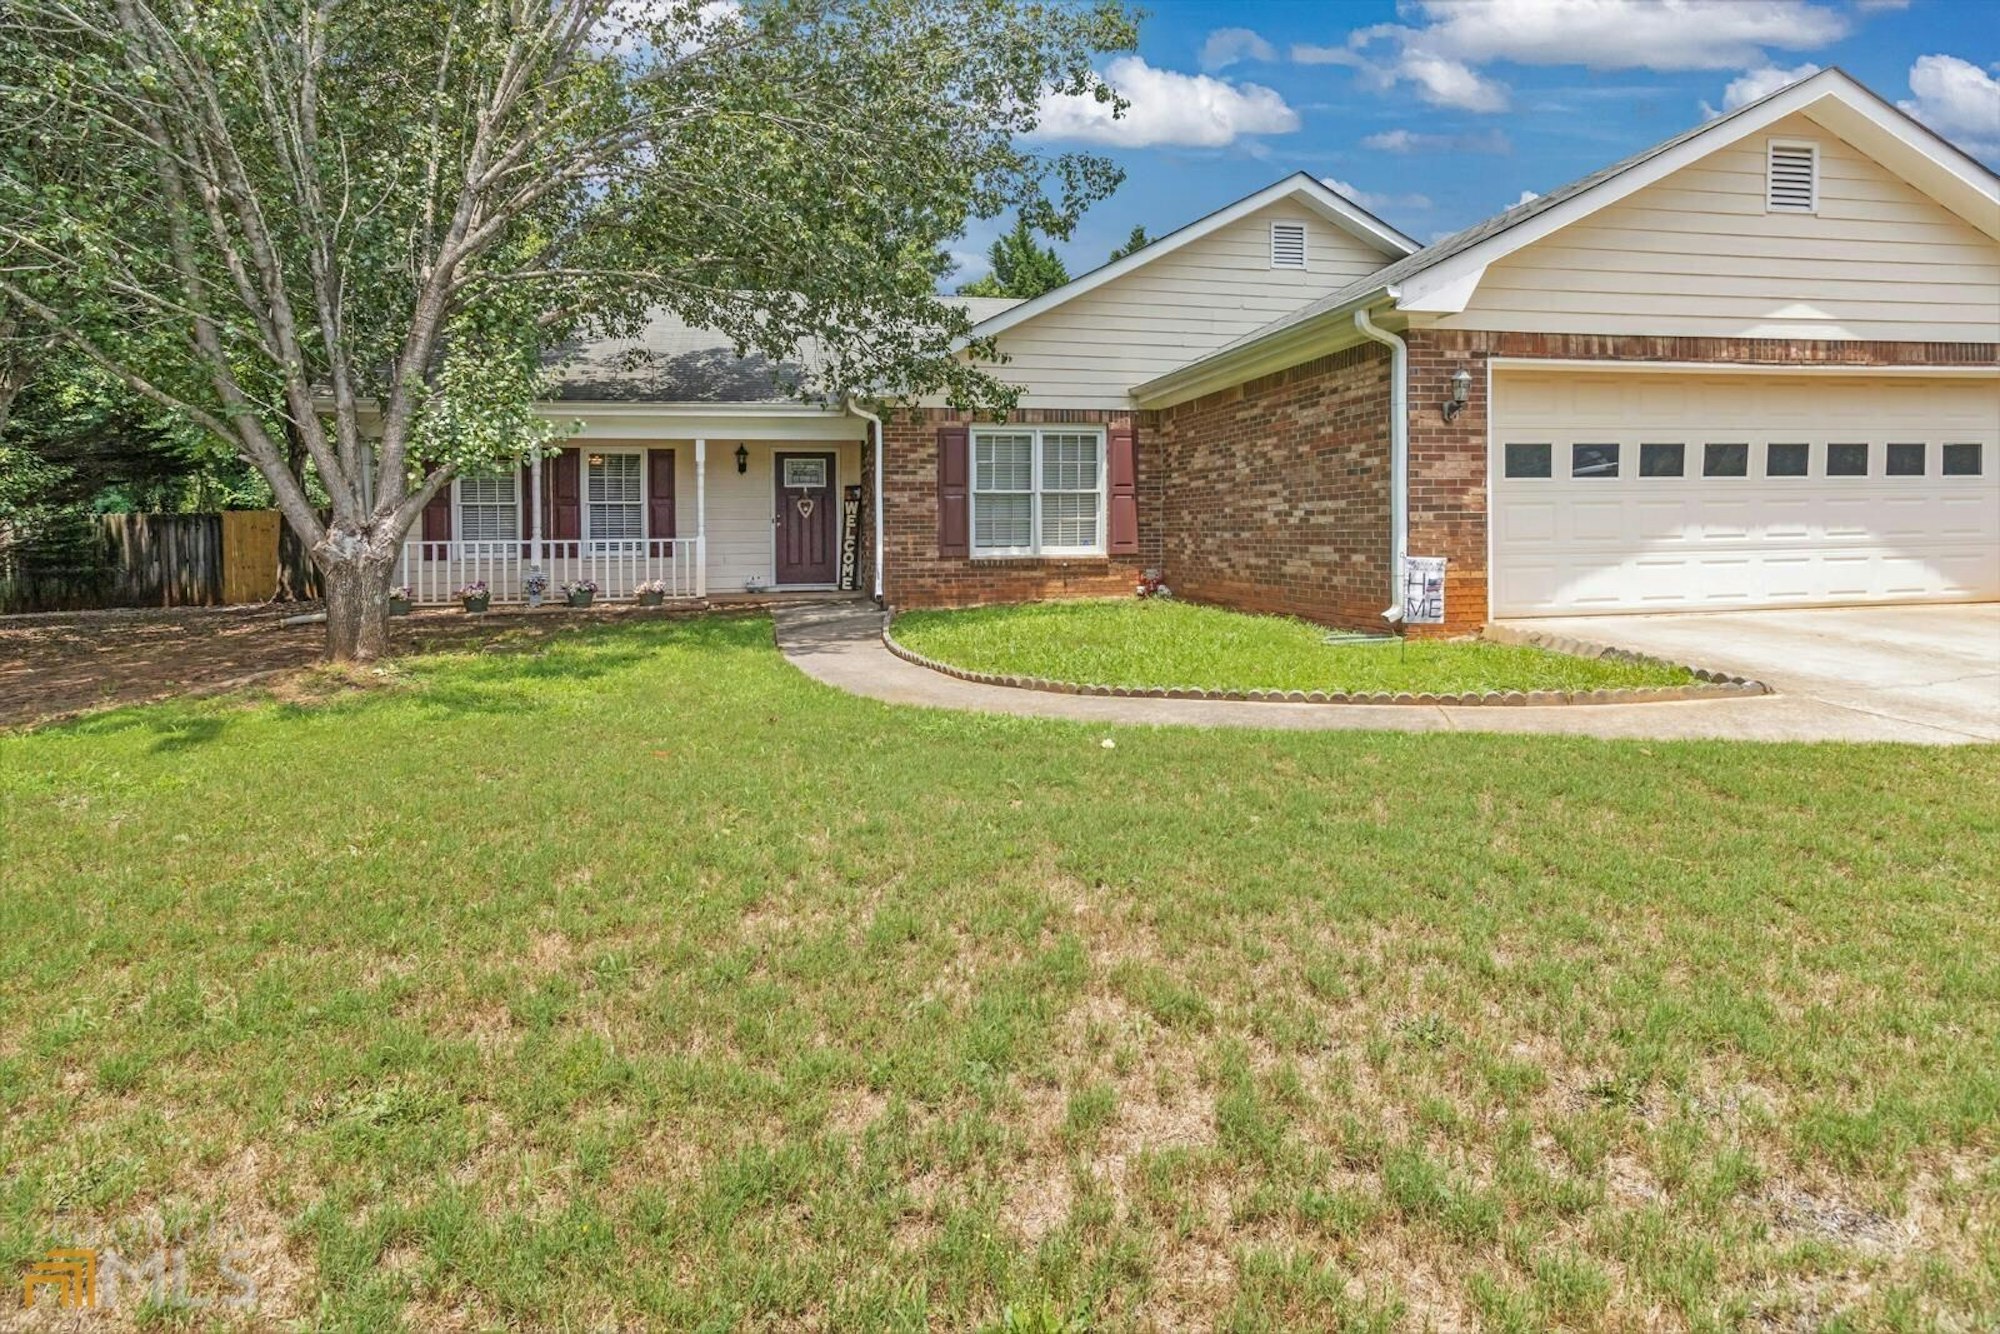 Photo 1 of 20 - 1260 Great Oaks Dr SE, Conyers, GA 30013